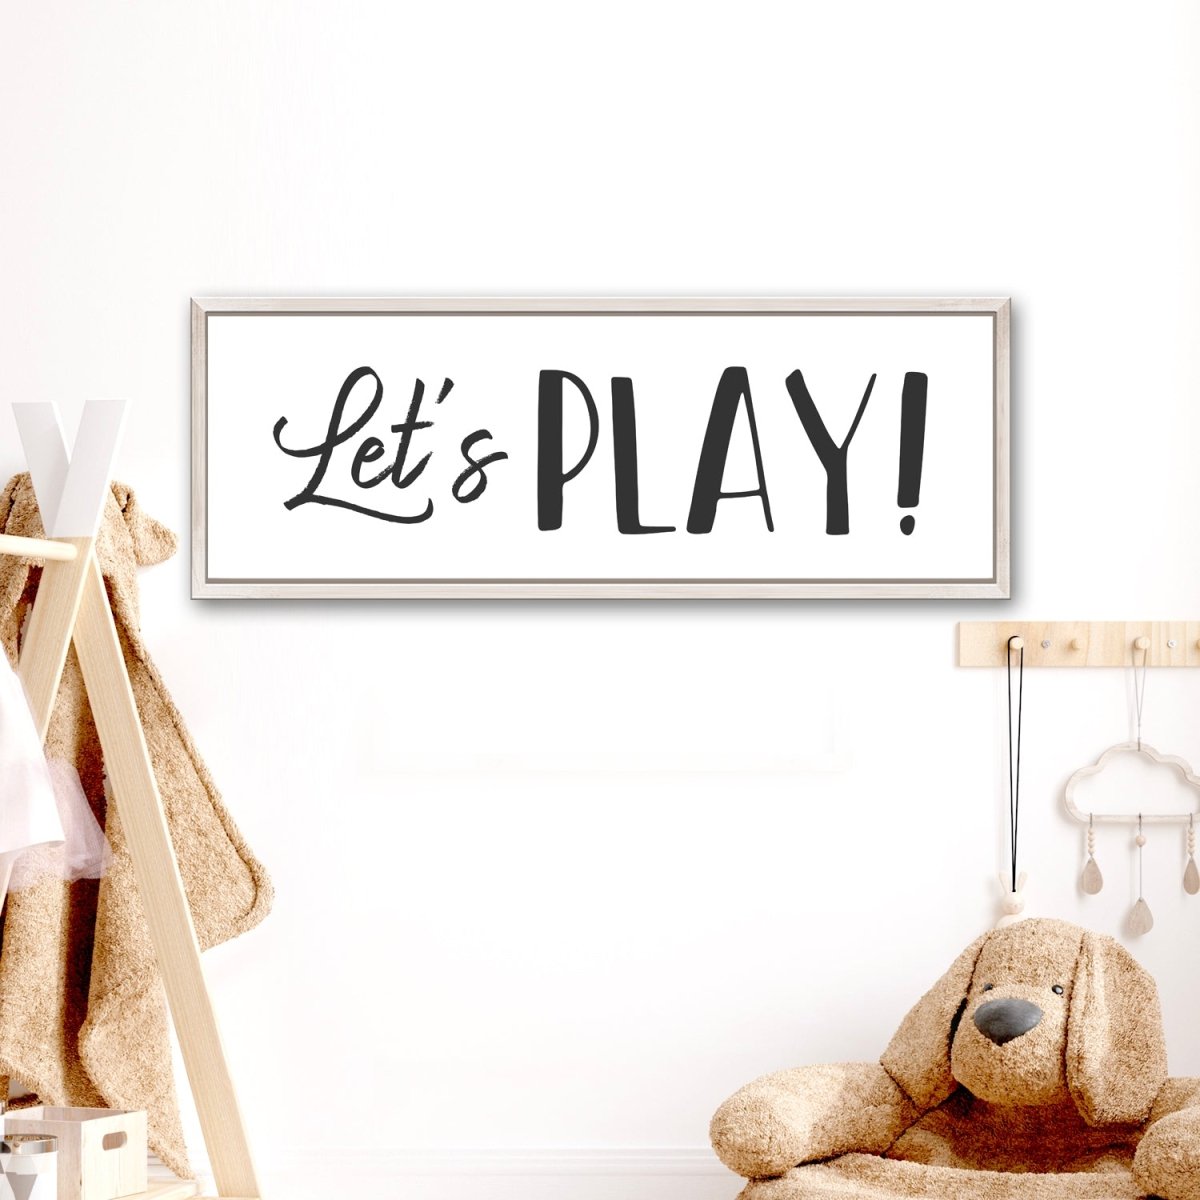 Let's Play Sign Hanging on Wall in Kids Play Room - Pretty Perfect Studio